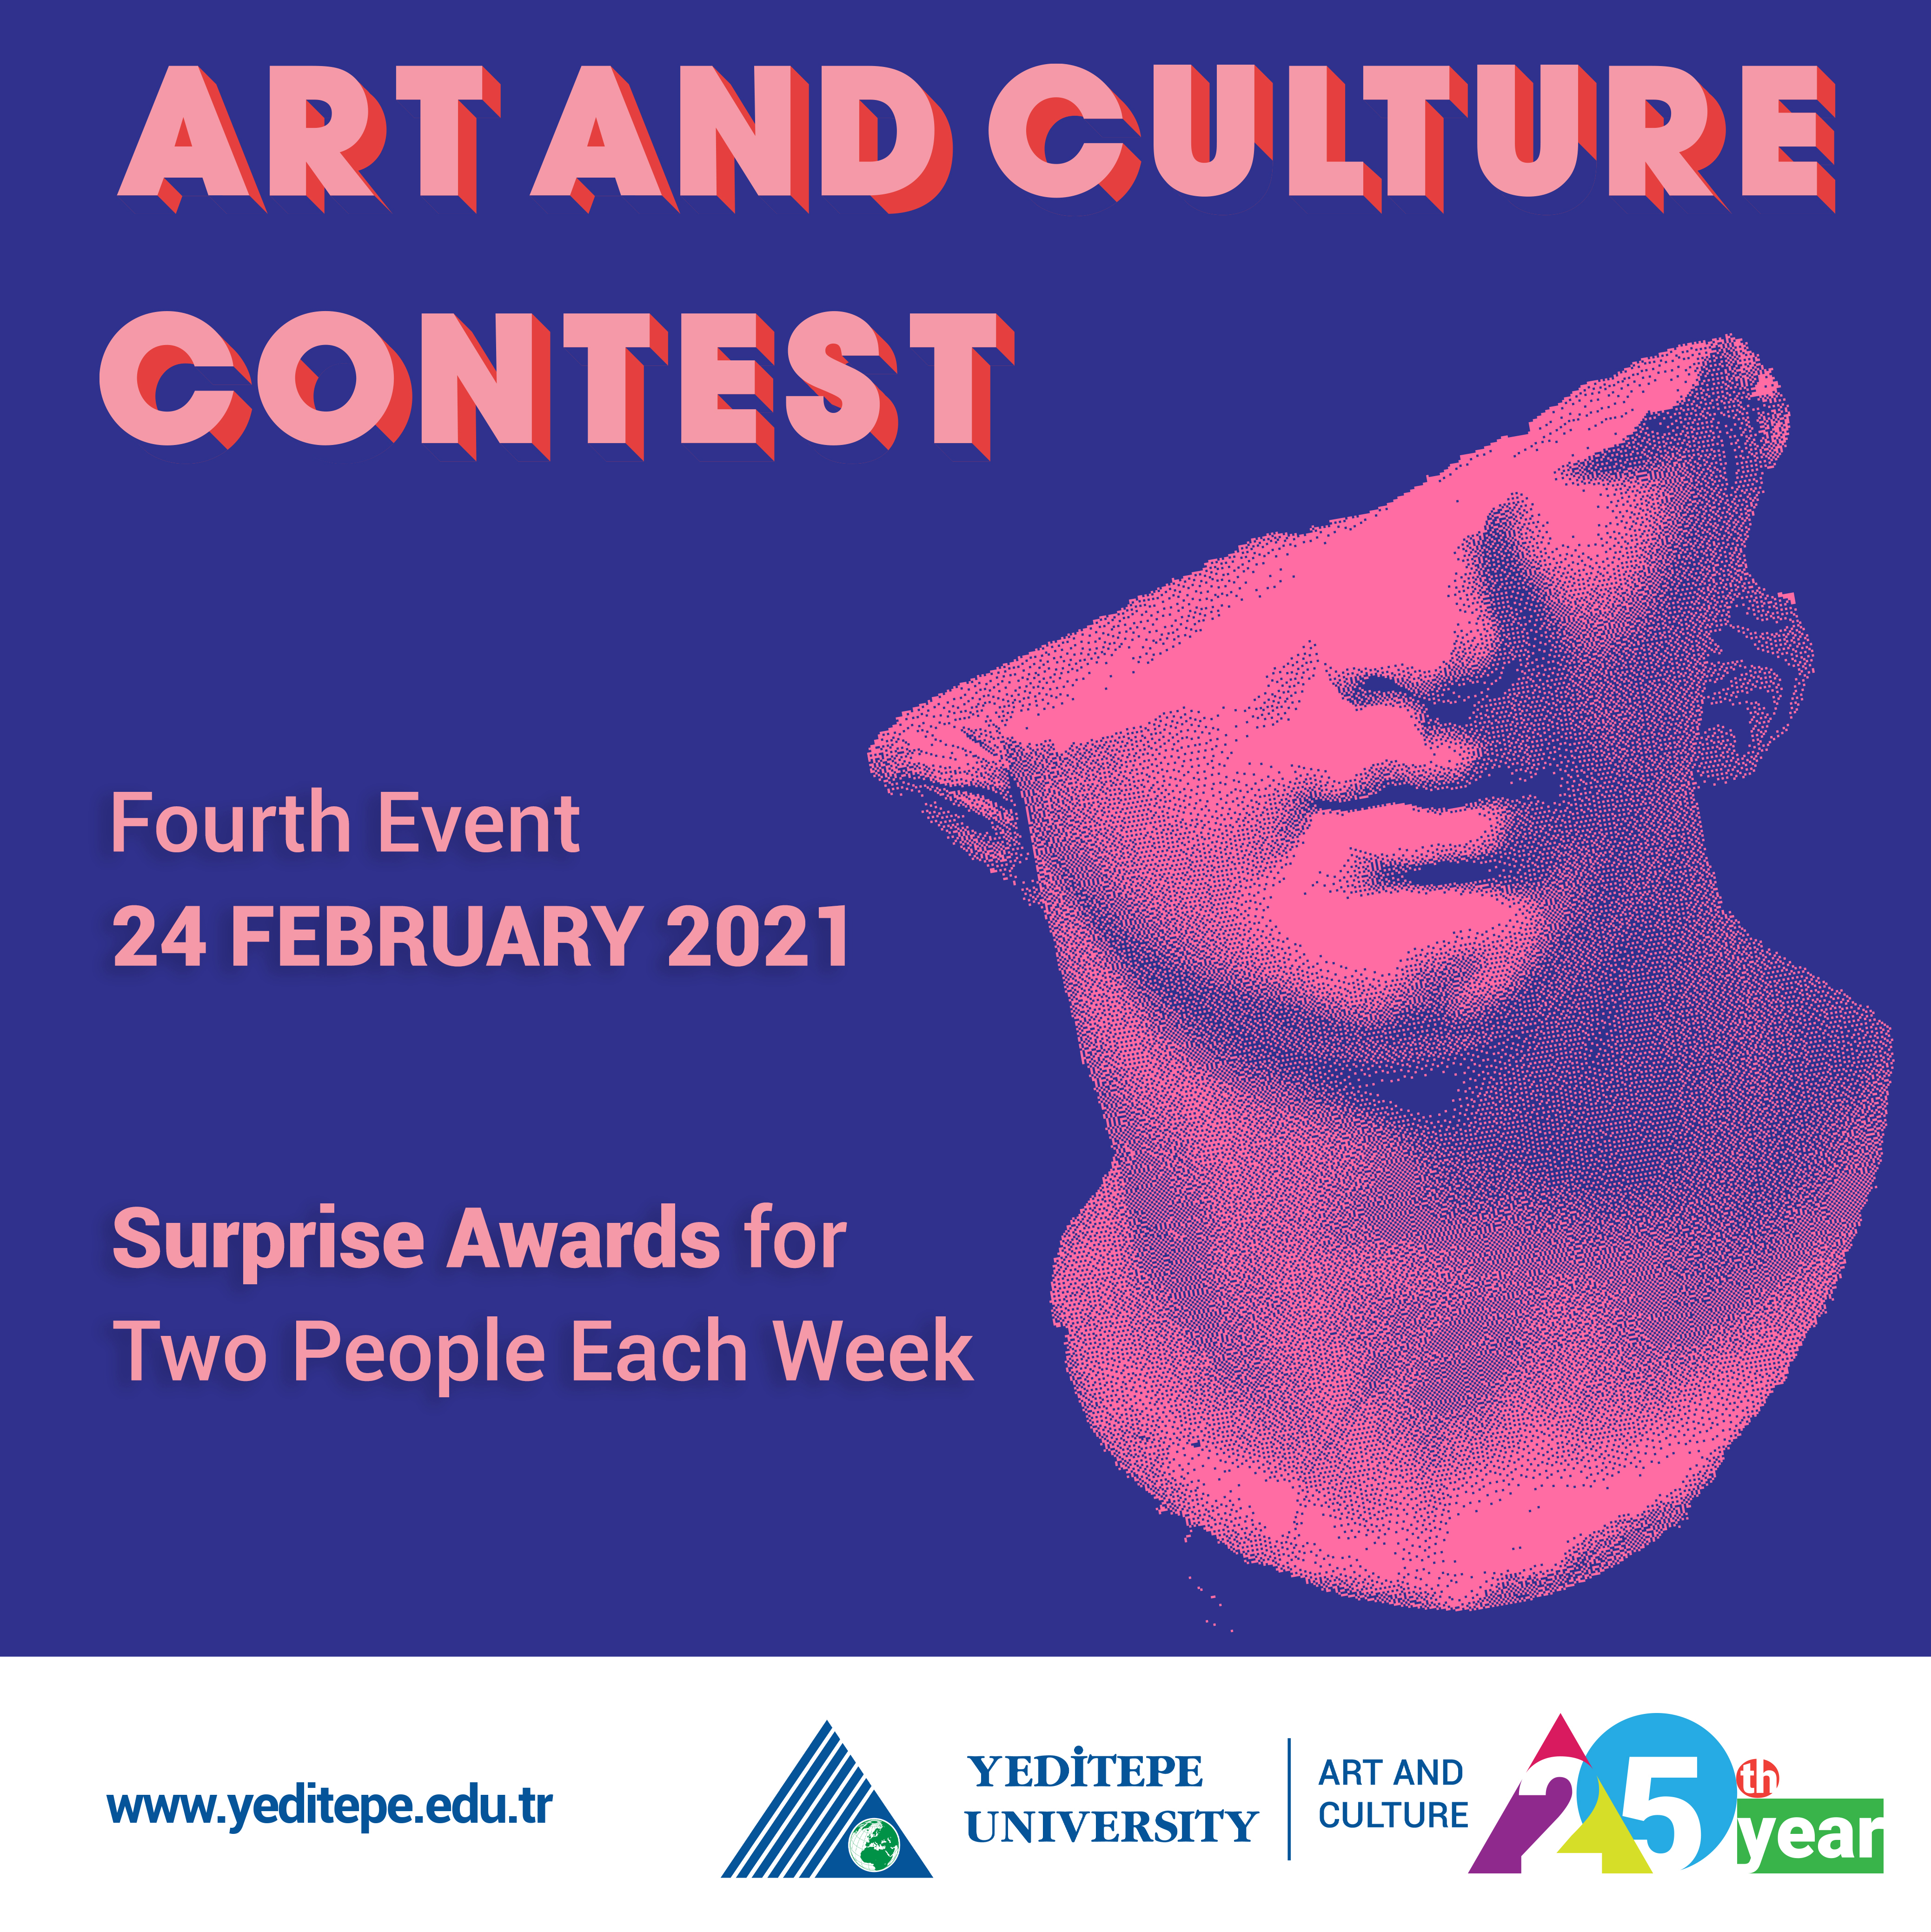 Art and Culture Contest (24.02.2021)